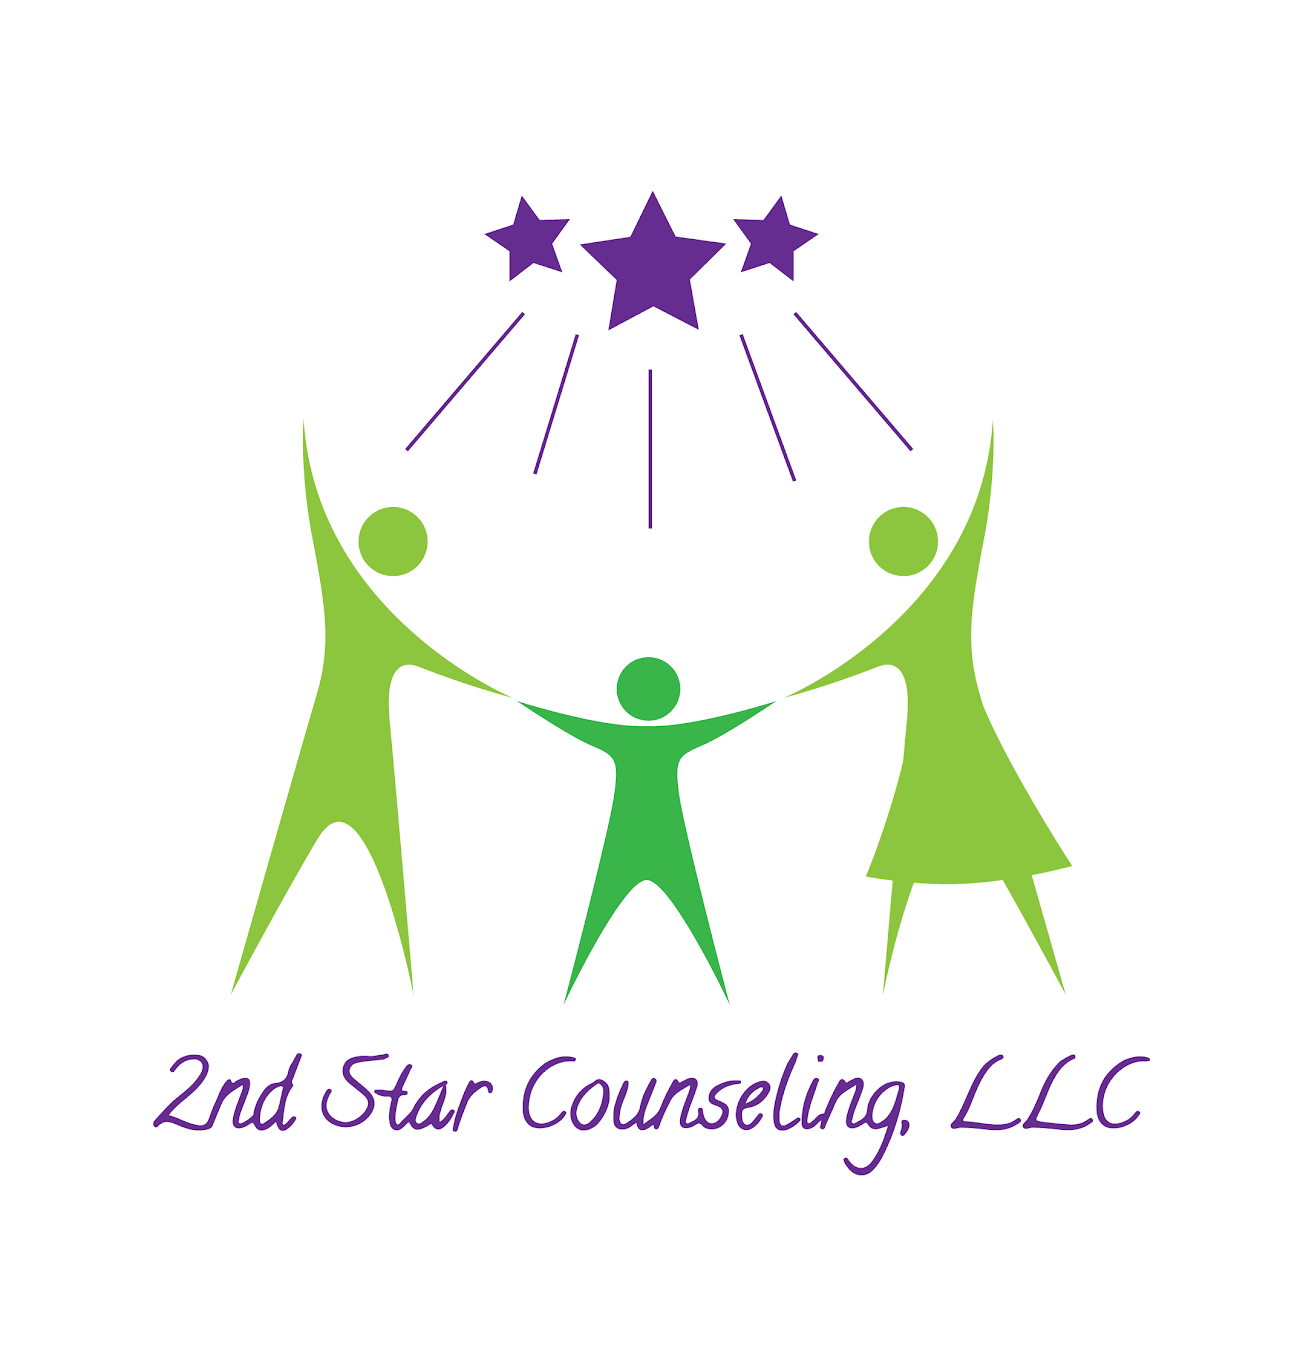 2nd Star Counseling